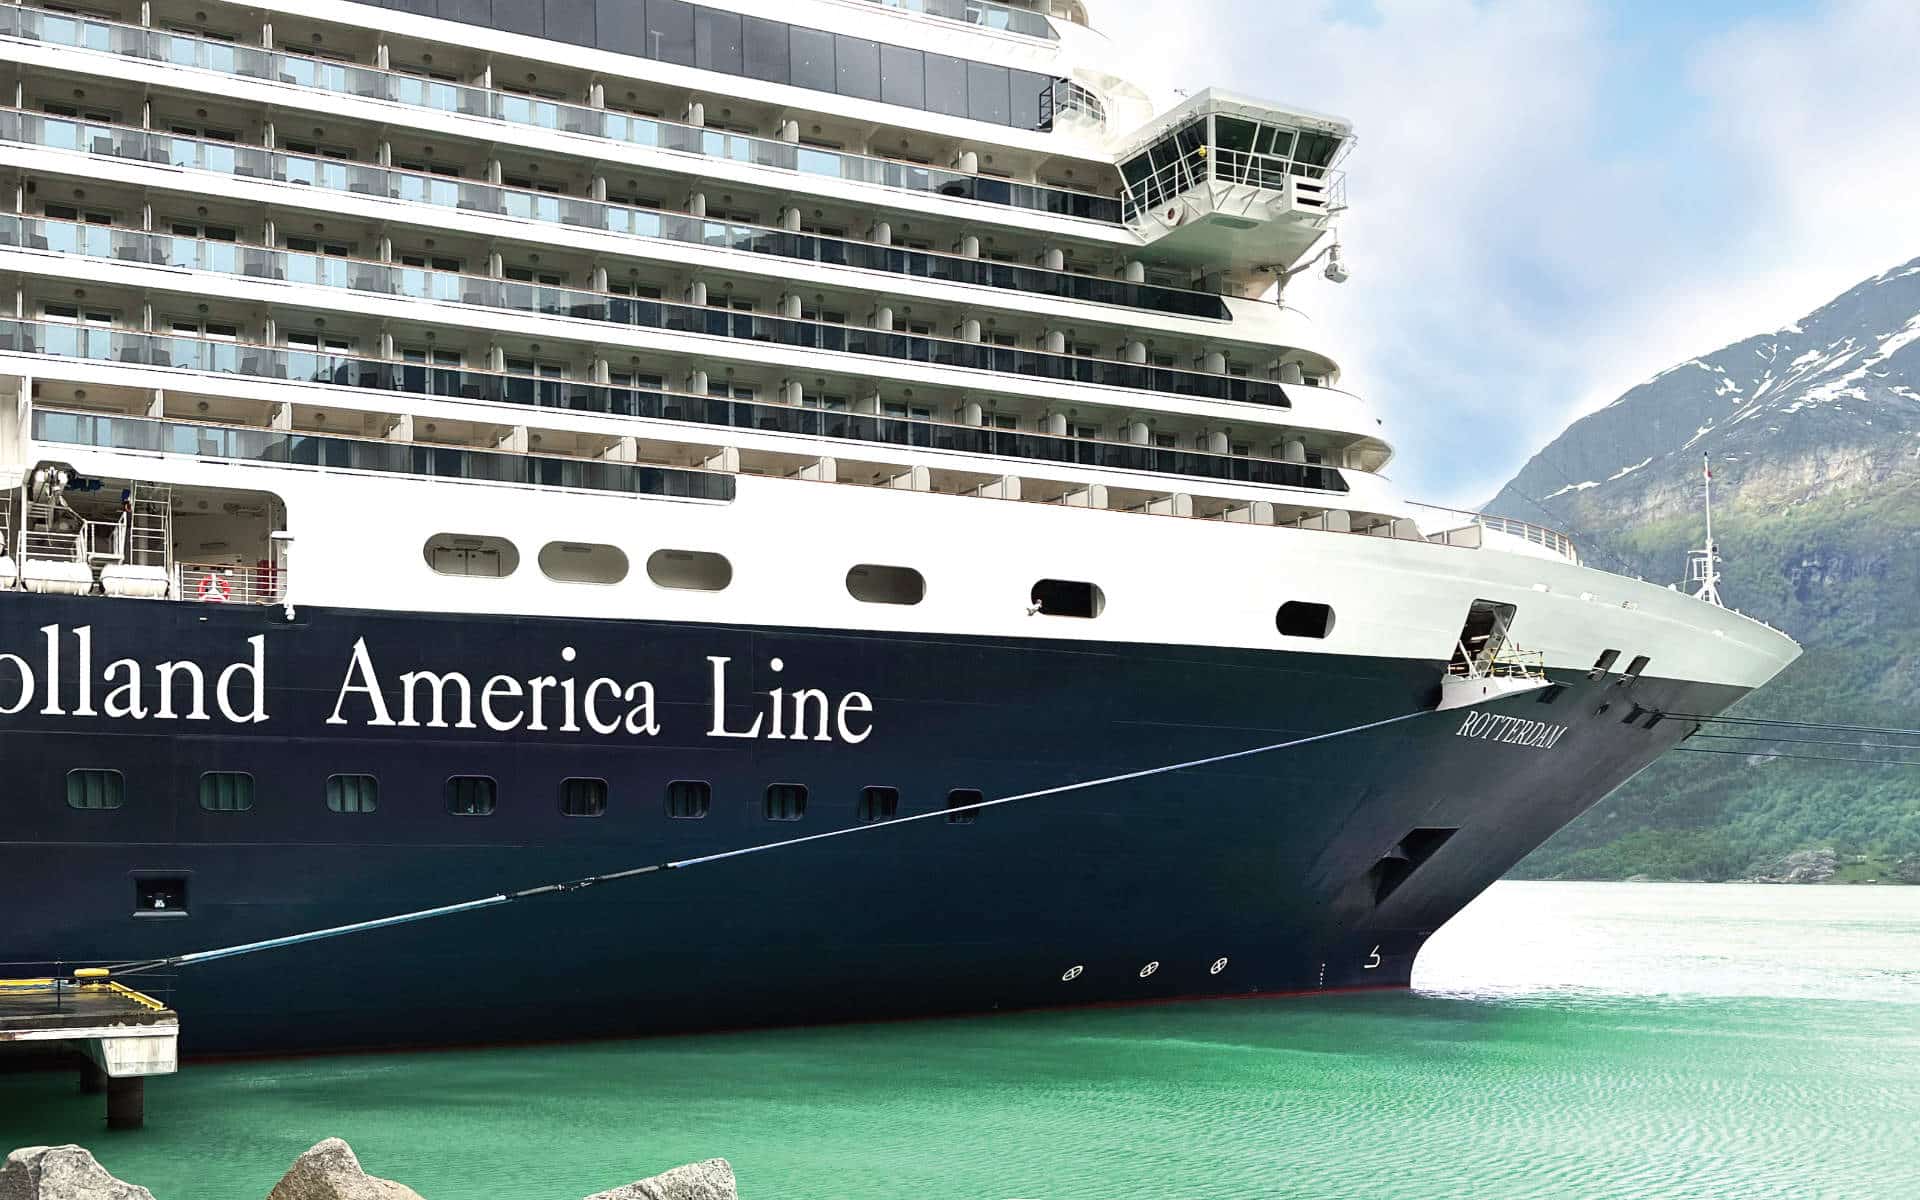 Holland America Line The Luxury Cruise Review